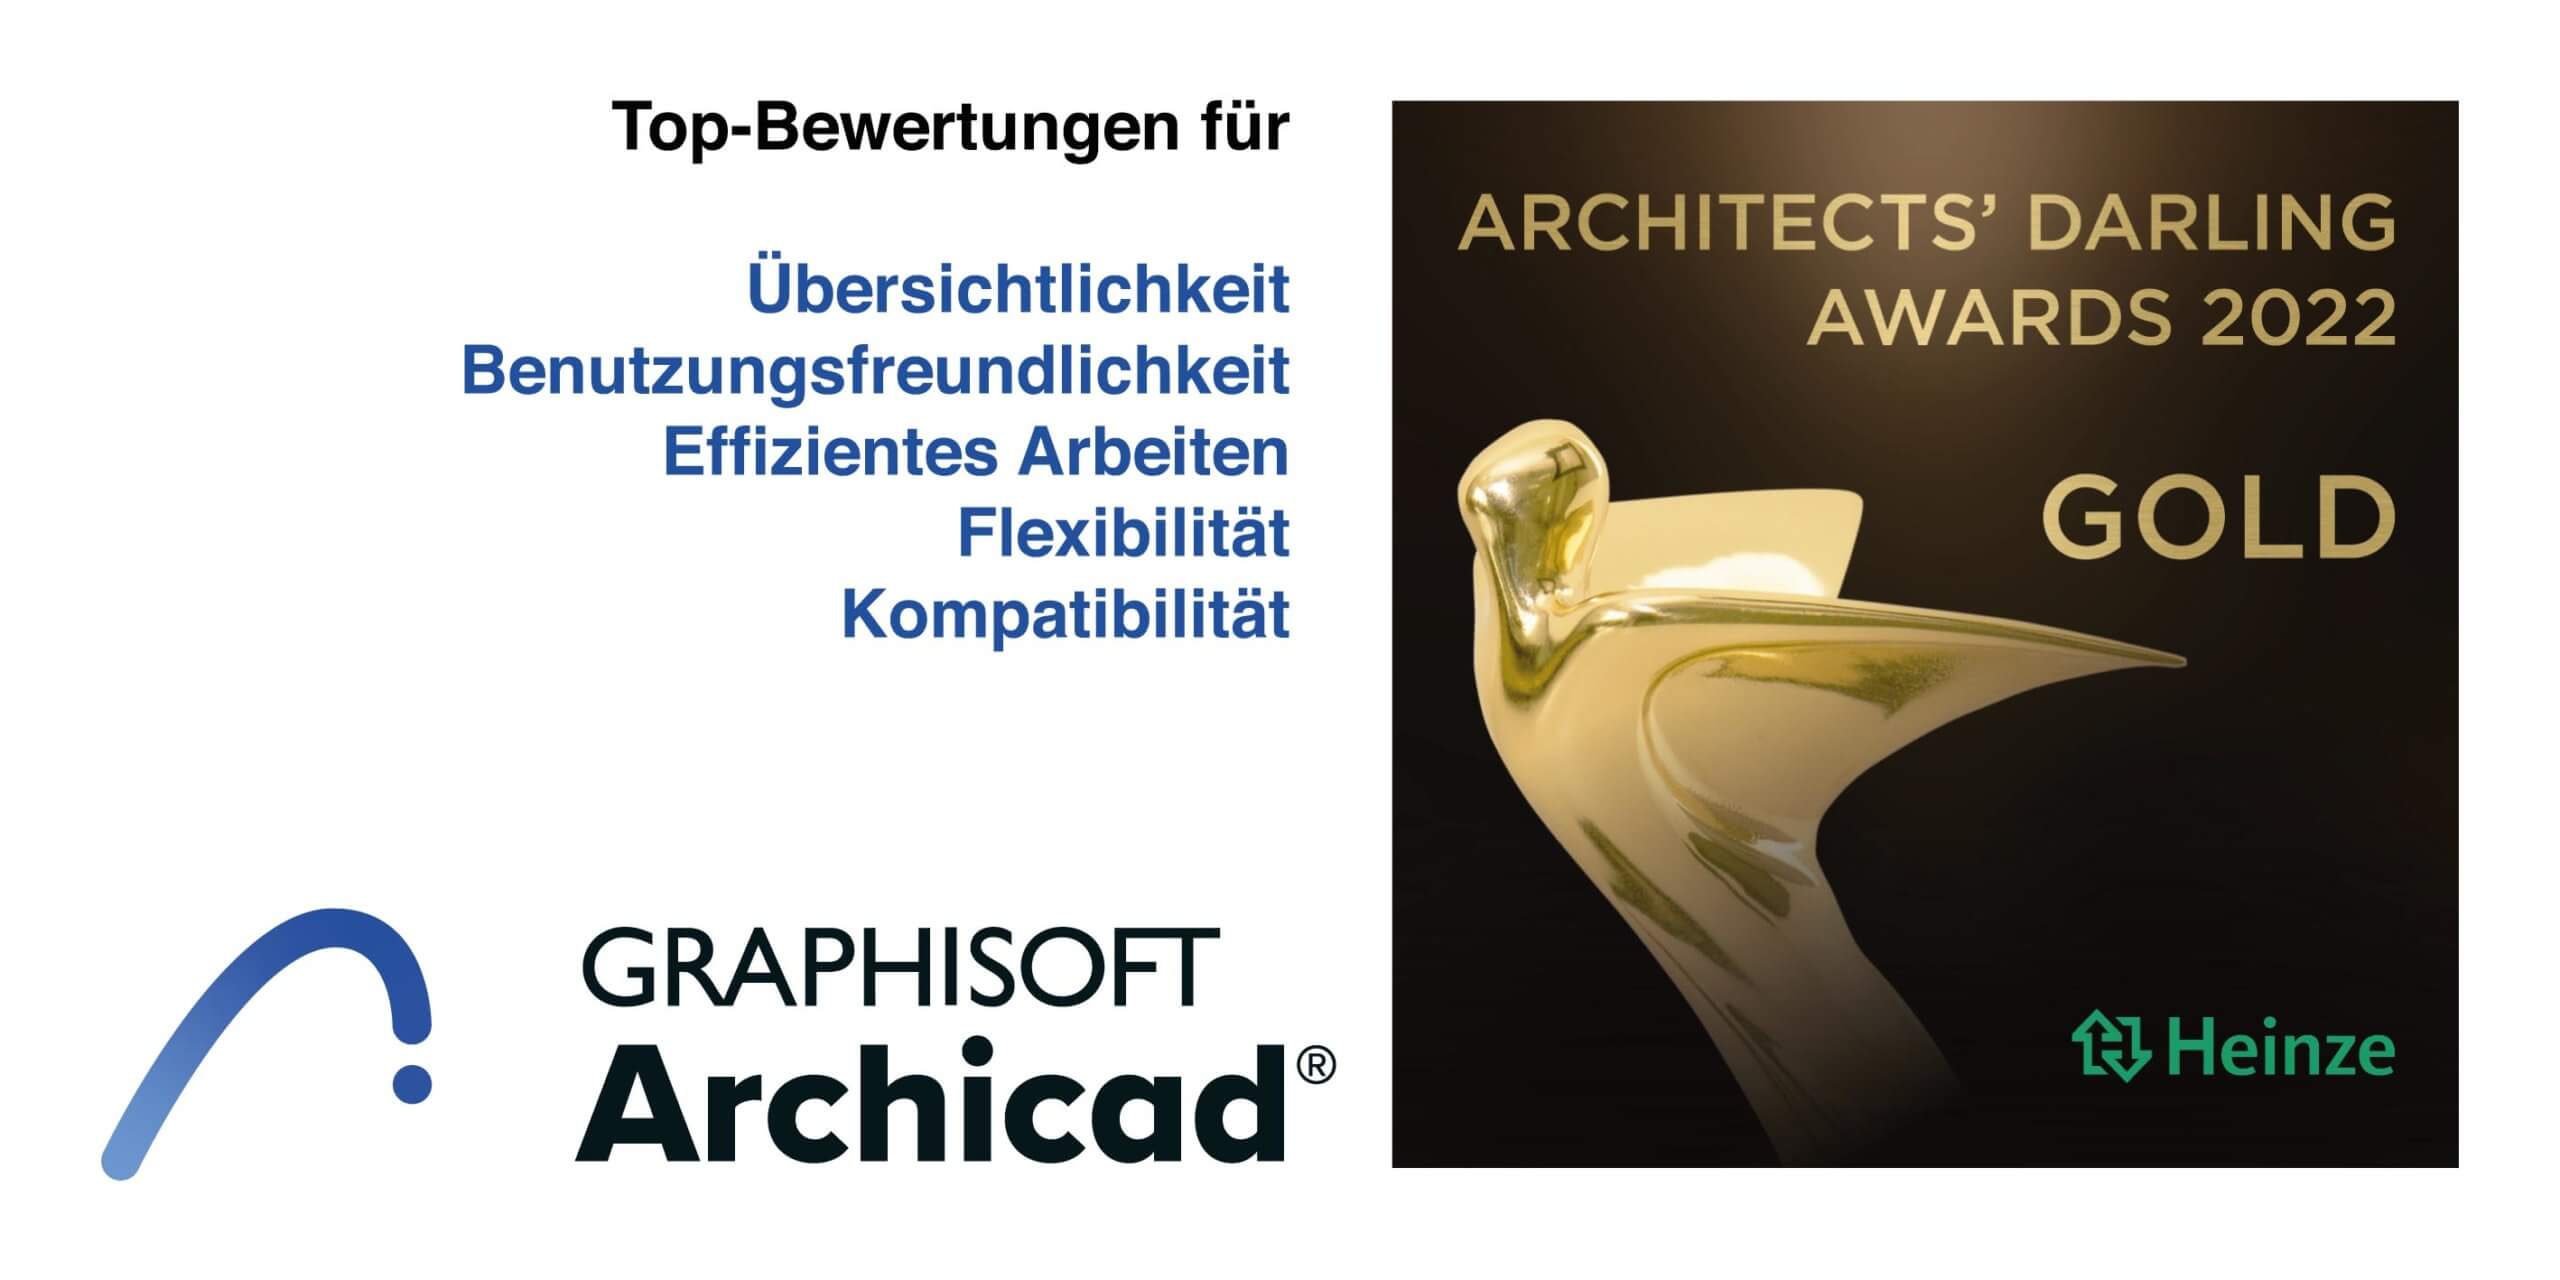 Archicad ist Architects‘ Darling